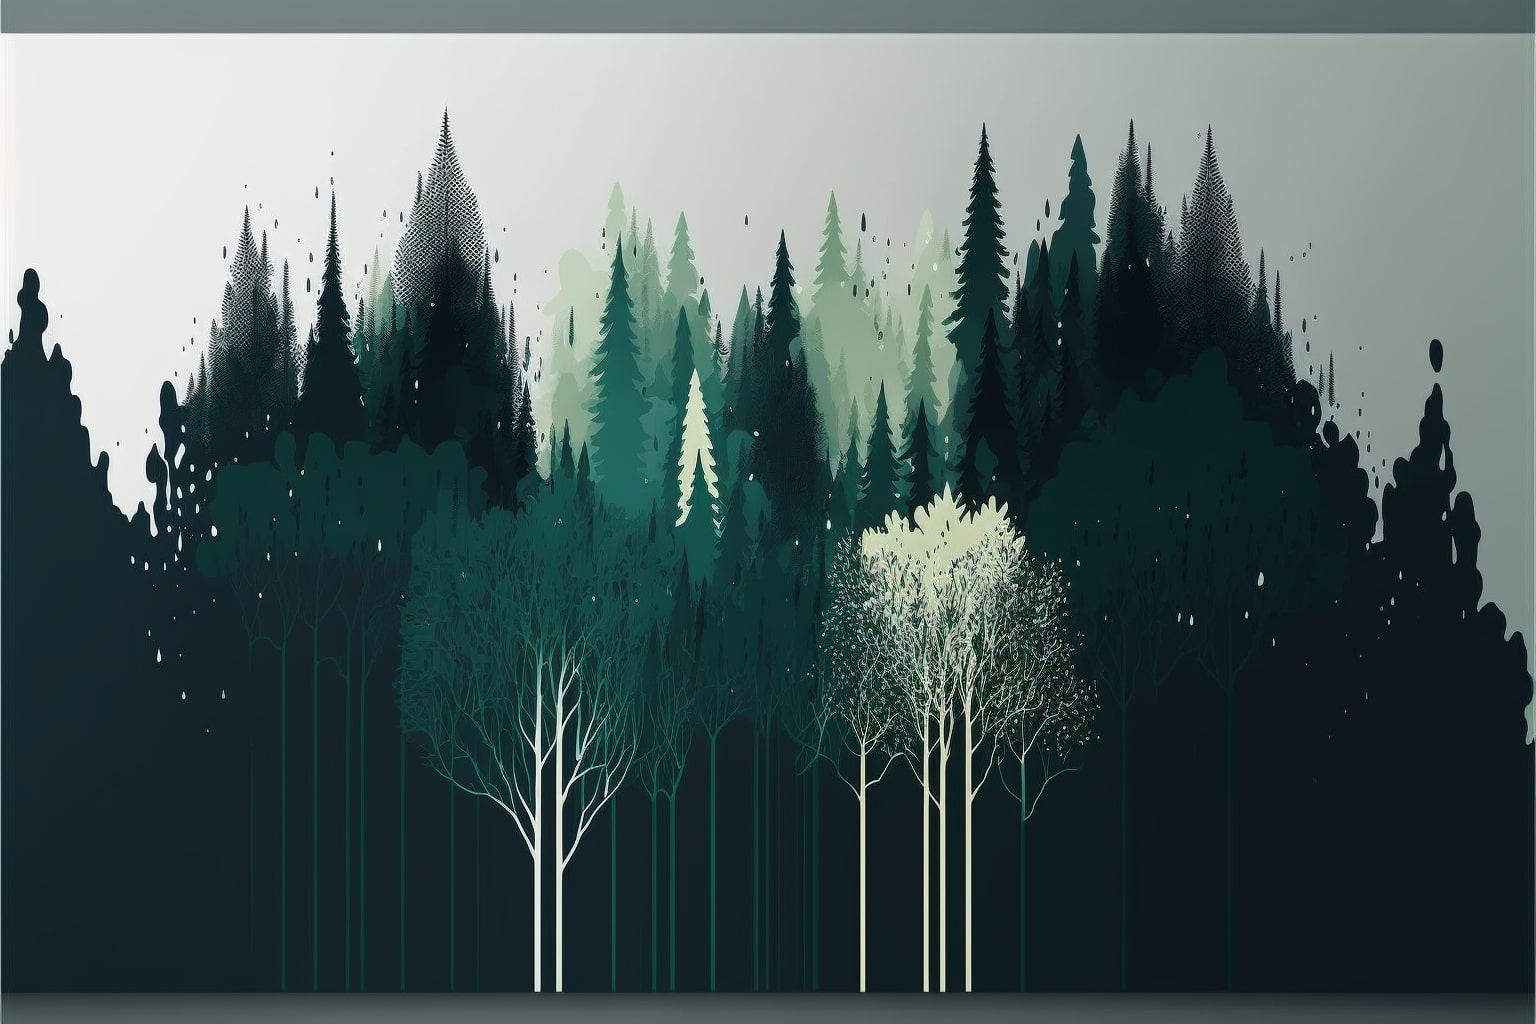 Painting of a forest filled with trees.